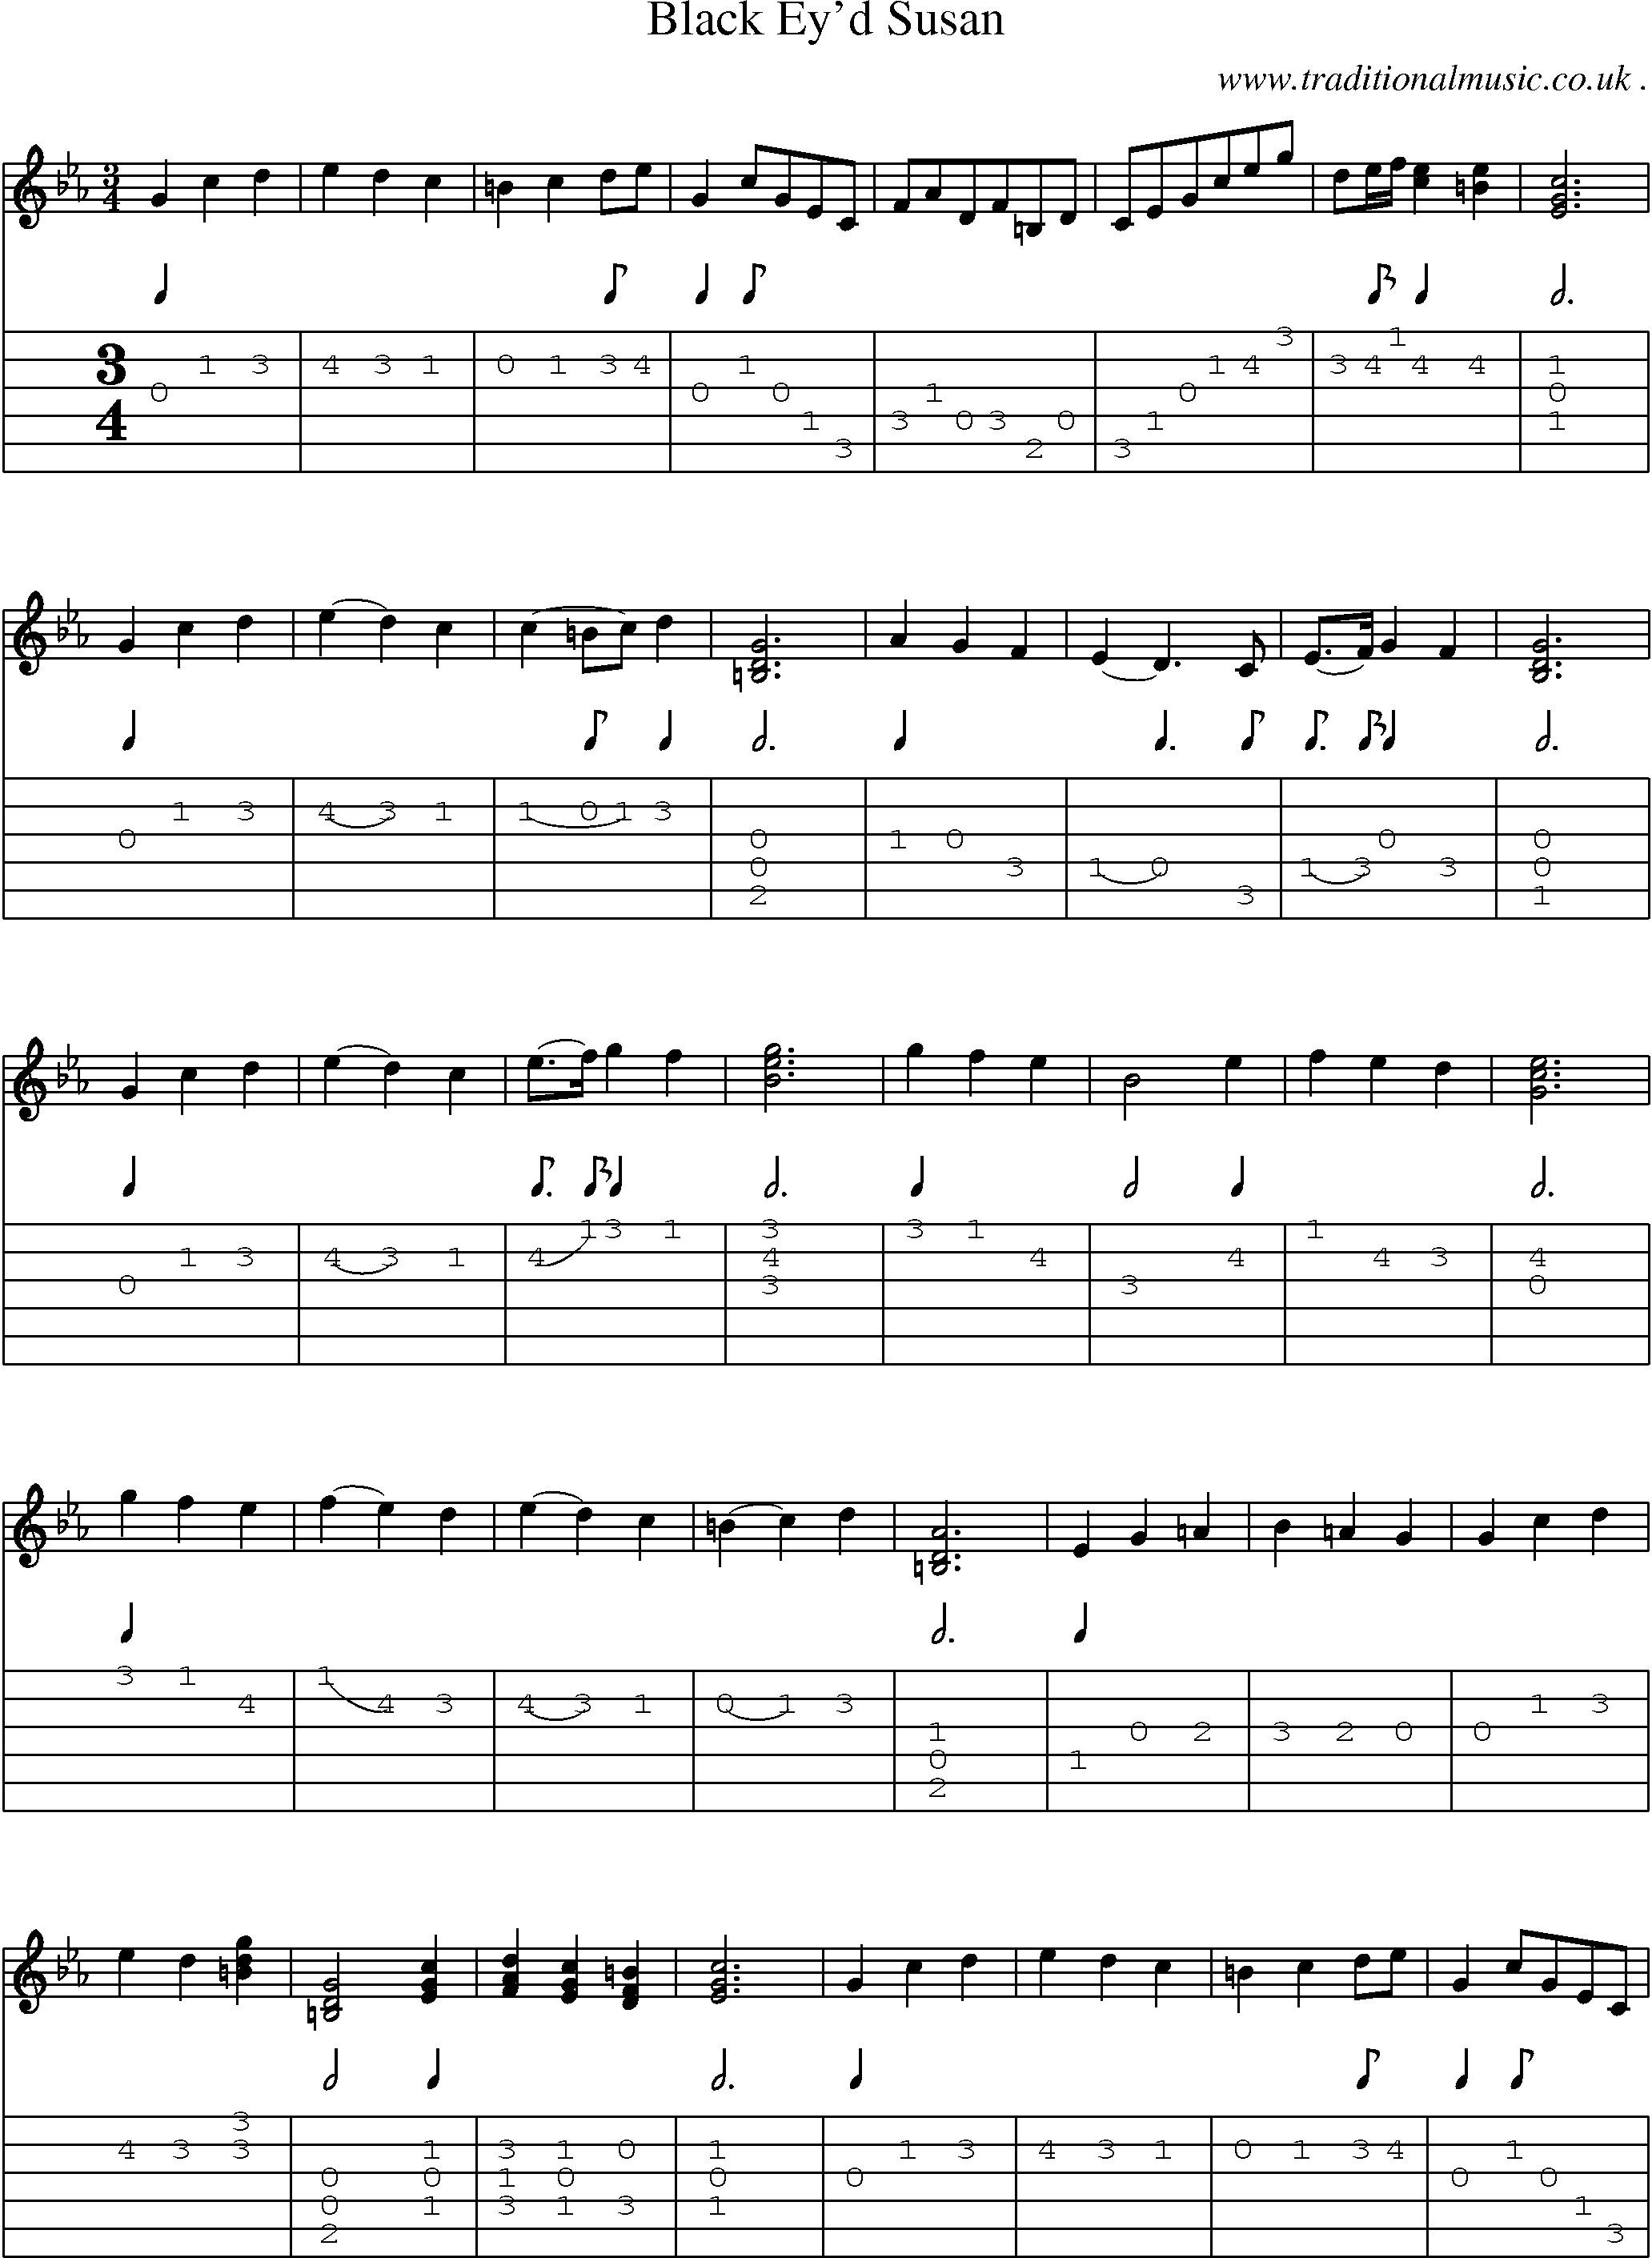 Sheet-Music and Guitar Tabs for Black Eyd Susan